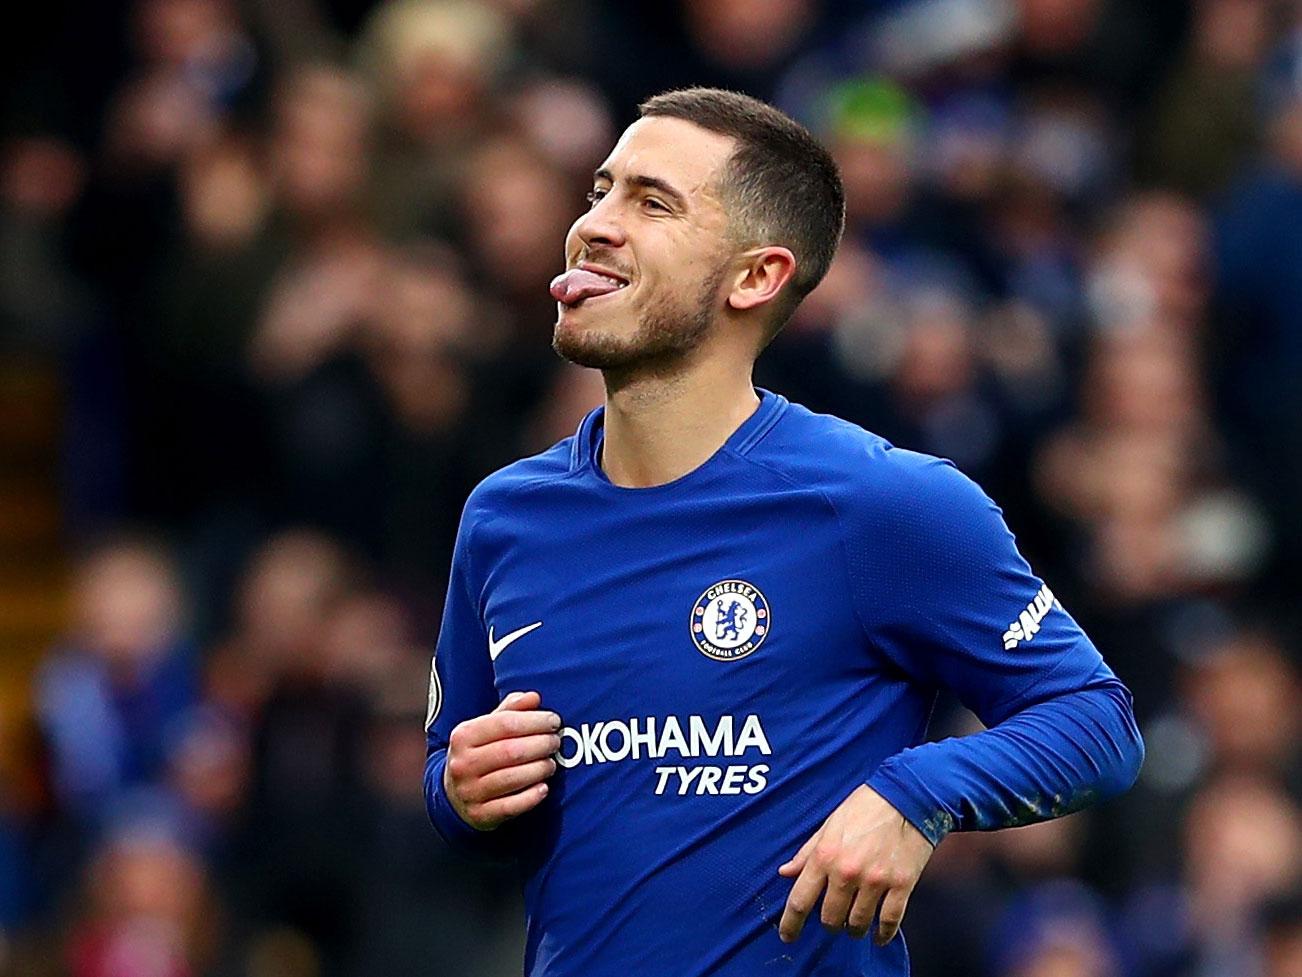 Hazard's father claimed a contract extension had been rejected